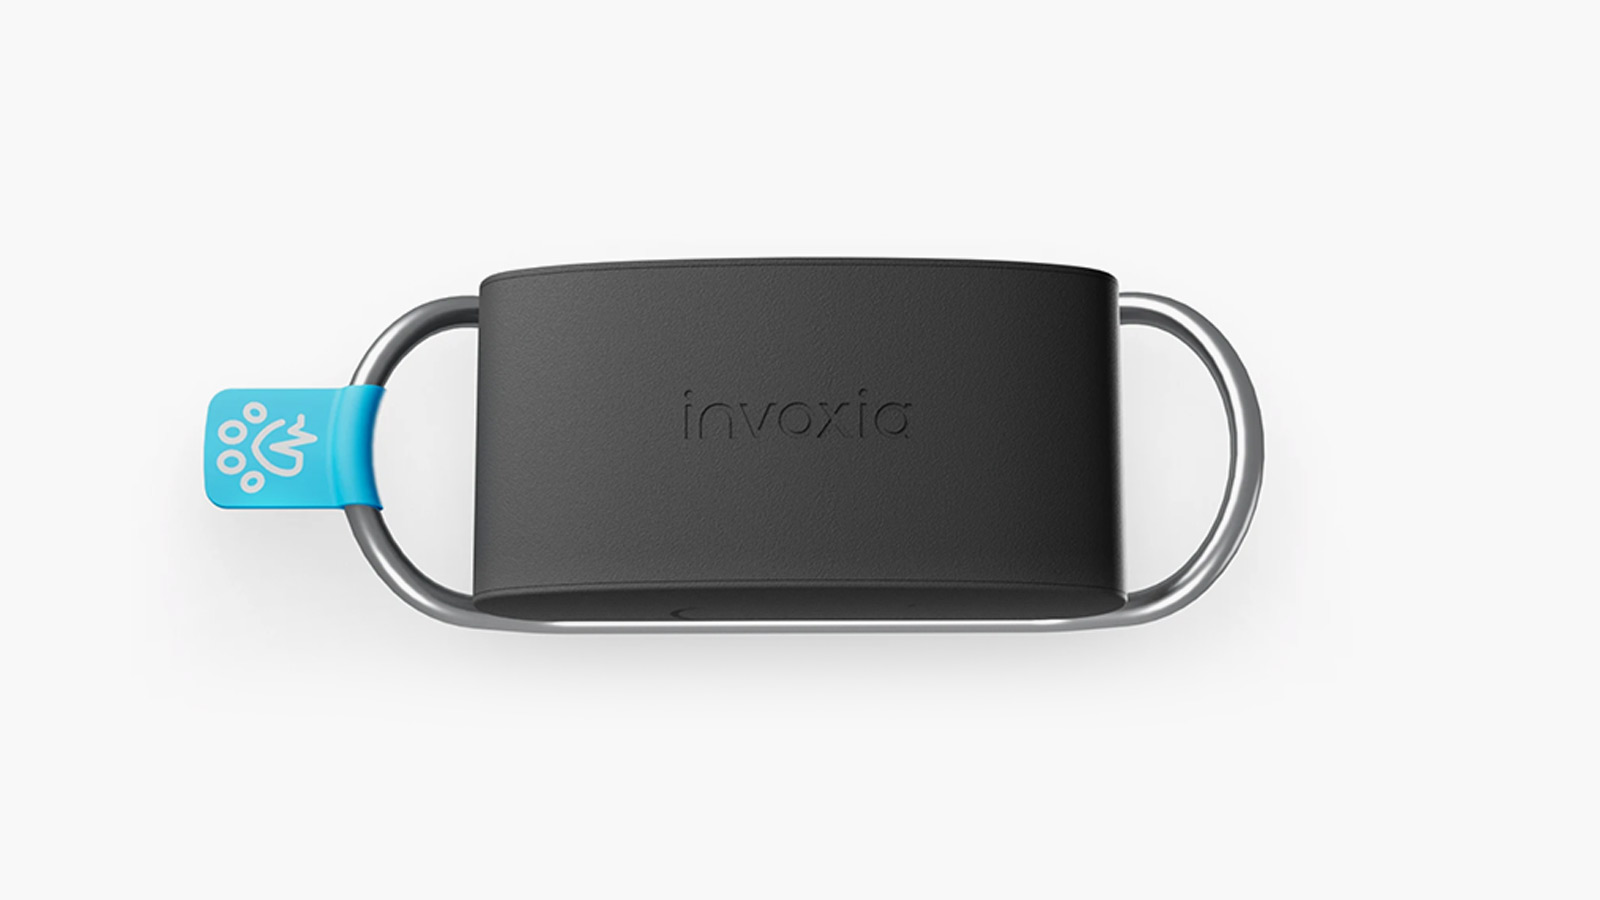 Invoxia Launches Minitailz, An AI Wearable That Monitors Your Pet's Health  - IMBOLDN